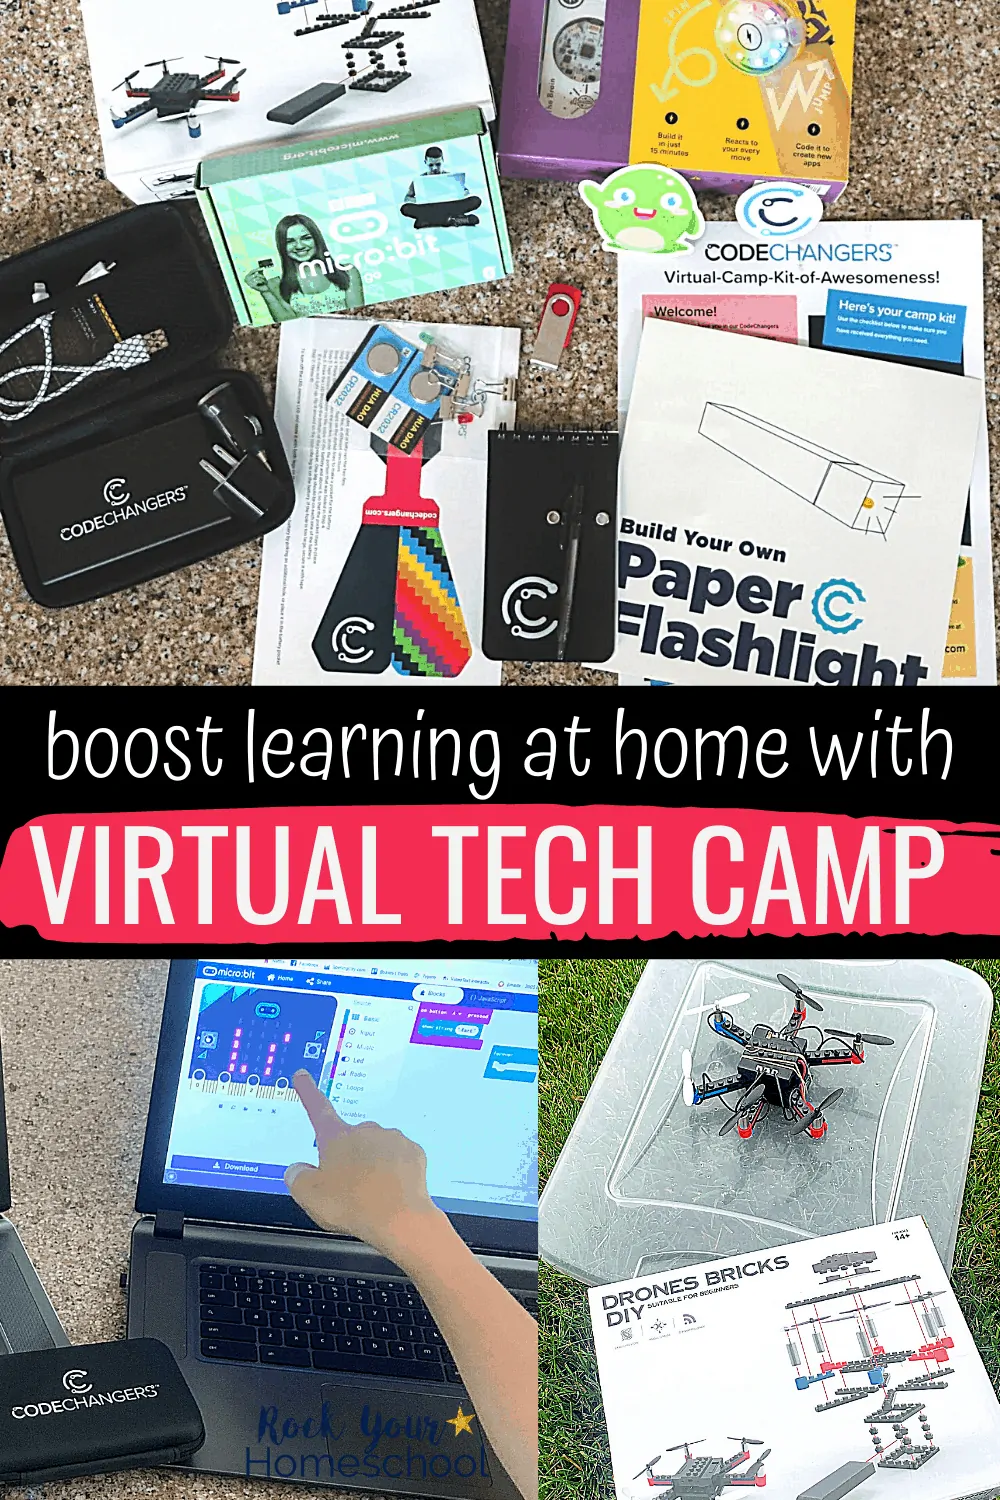 How to Boost Learning at Home with Virtual Tech Camp Experiences